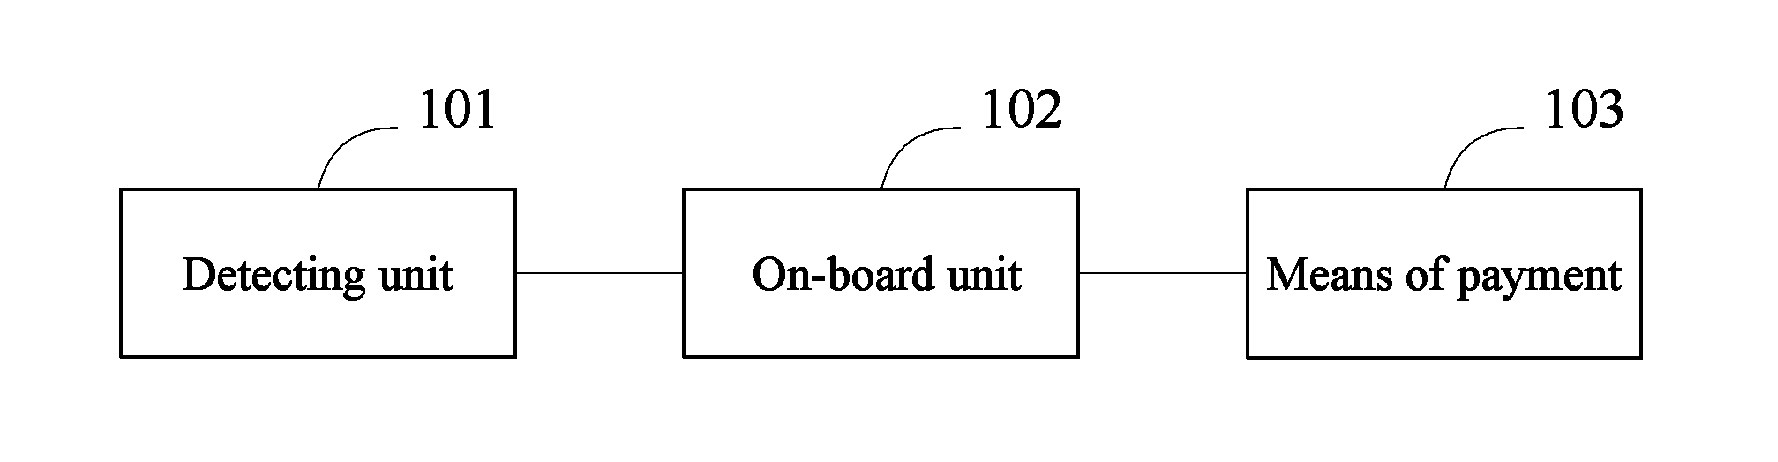 Intelligent charging system and method for use in a parking lot